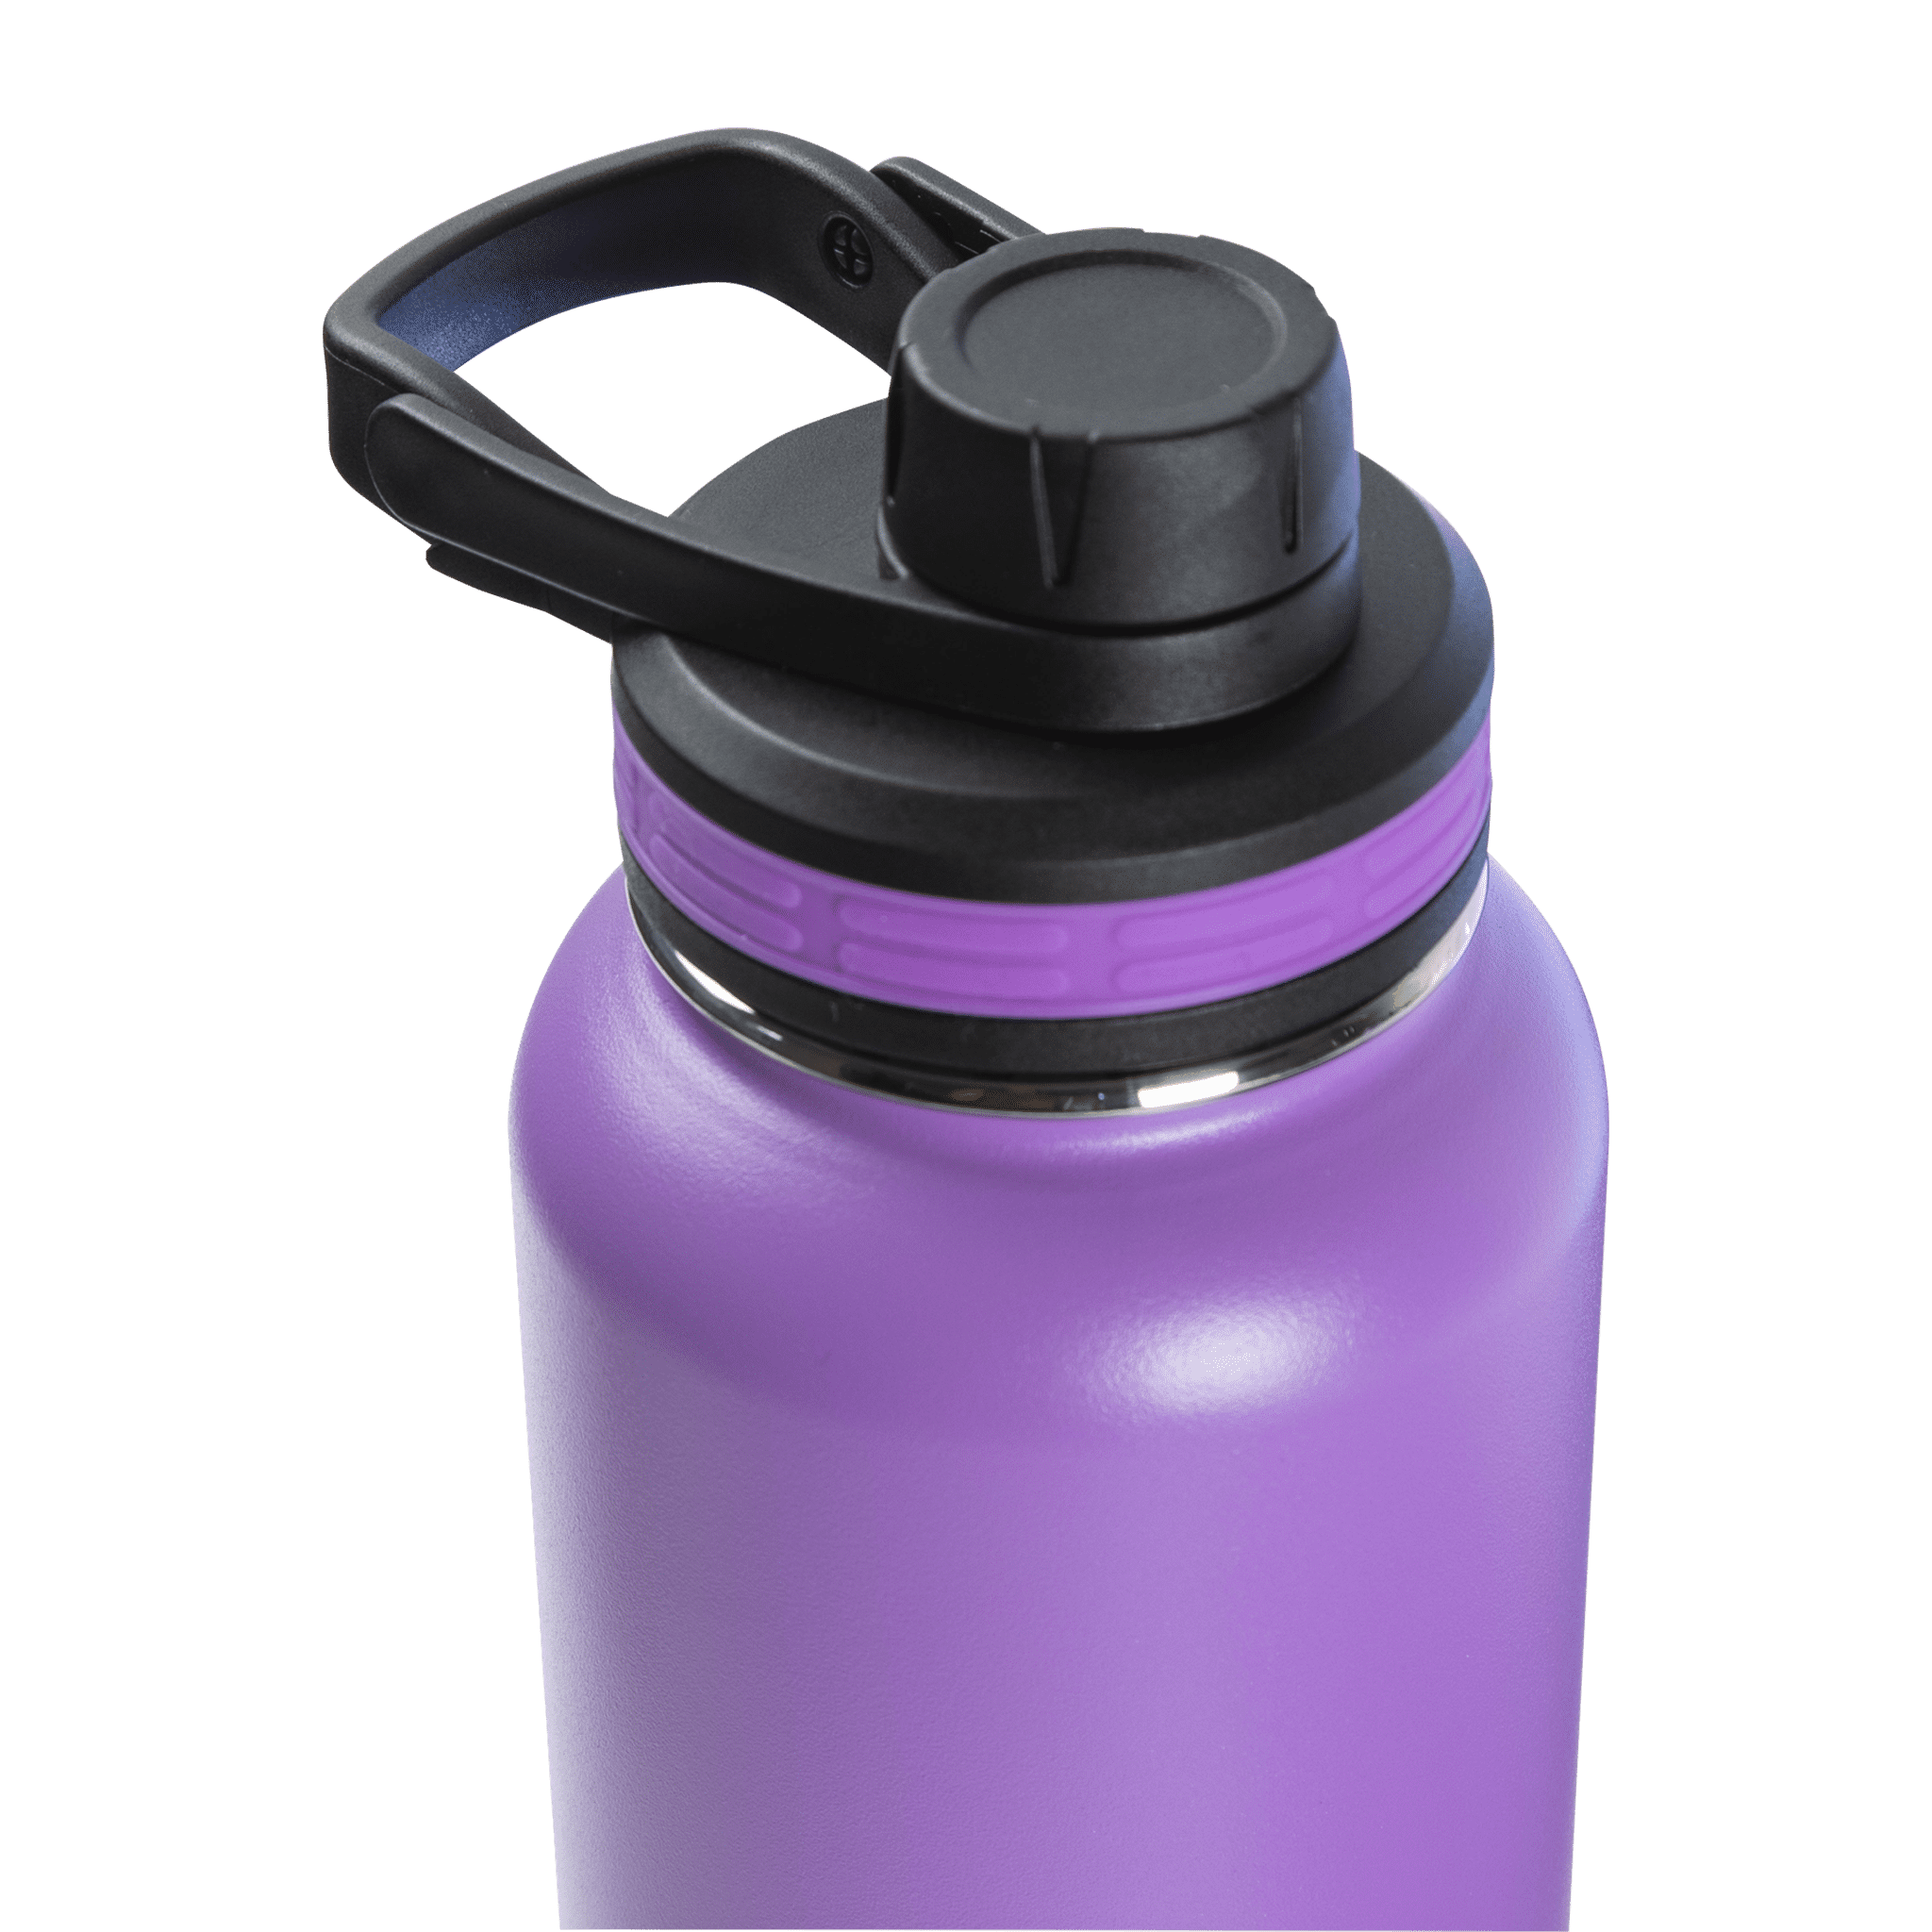 Thermoflask Double Stainless Steel Insulated Water Bottle 18 oz Plum 